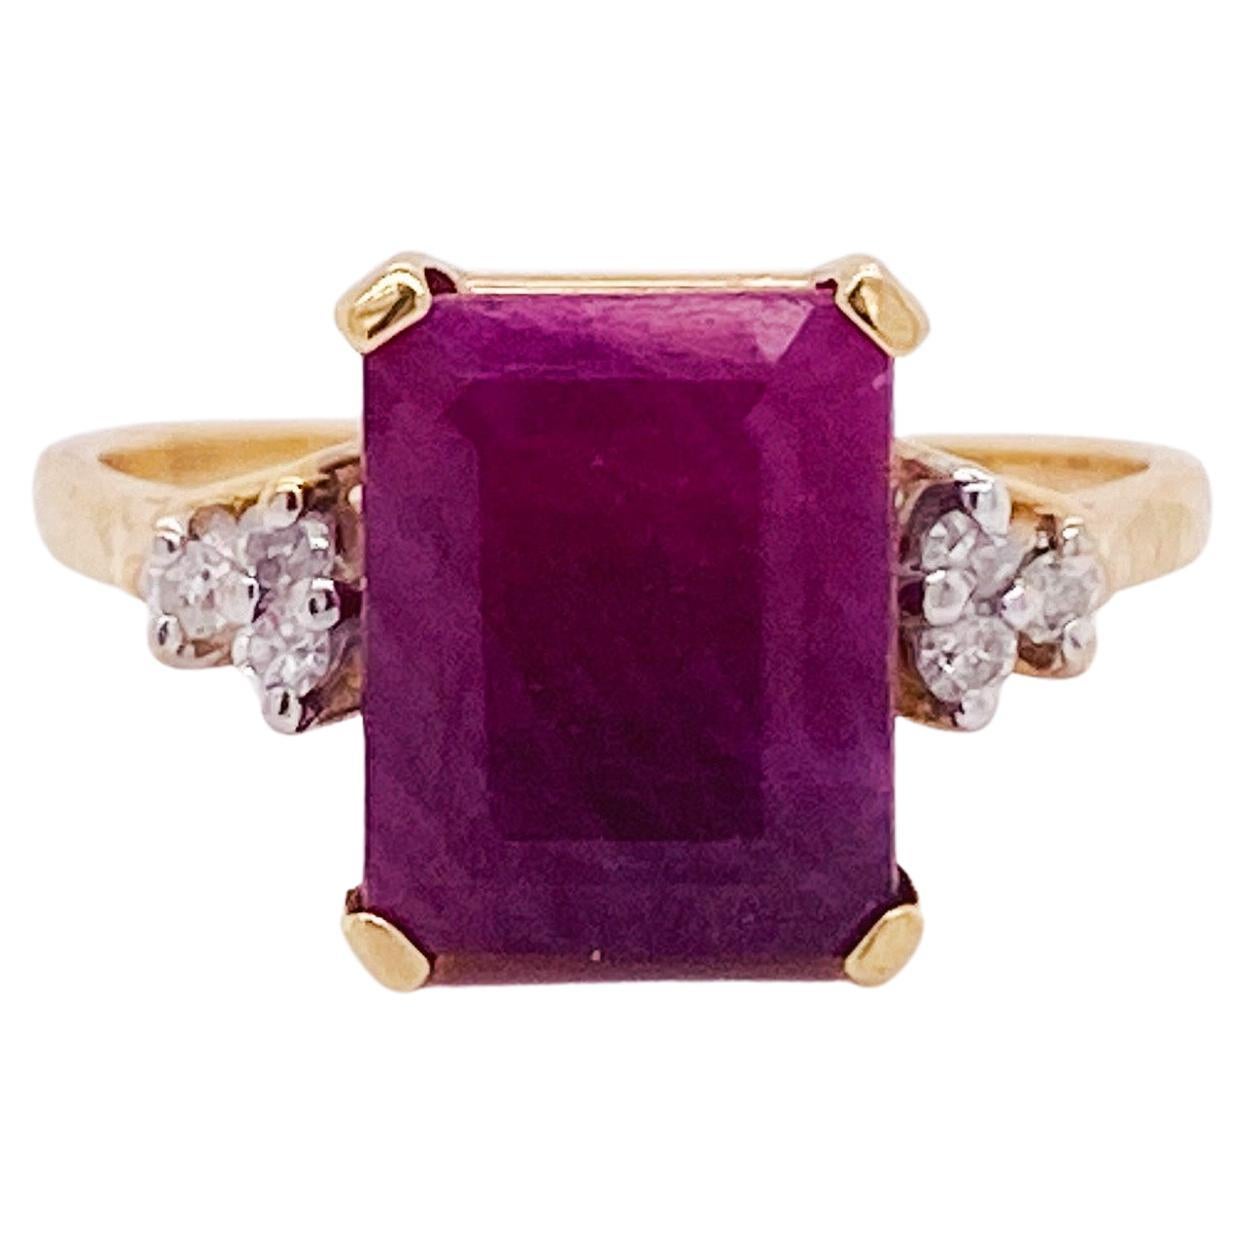 Emerald Cut Ruby and Diamond Ring 4.40 Carat Ruby in 14k Yellow Gold ...